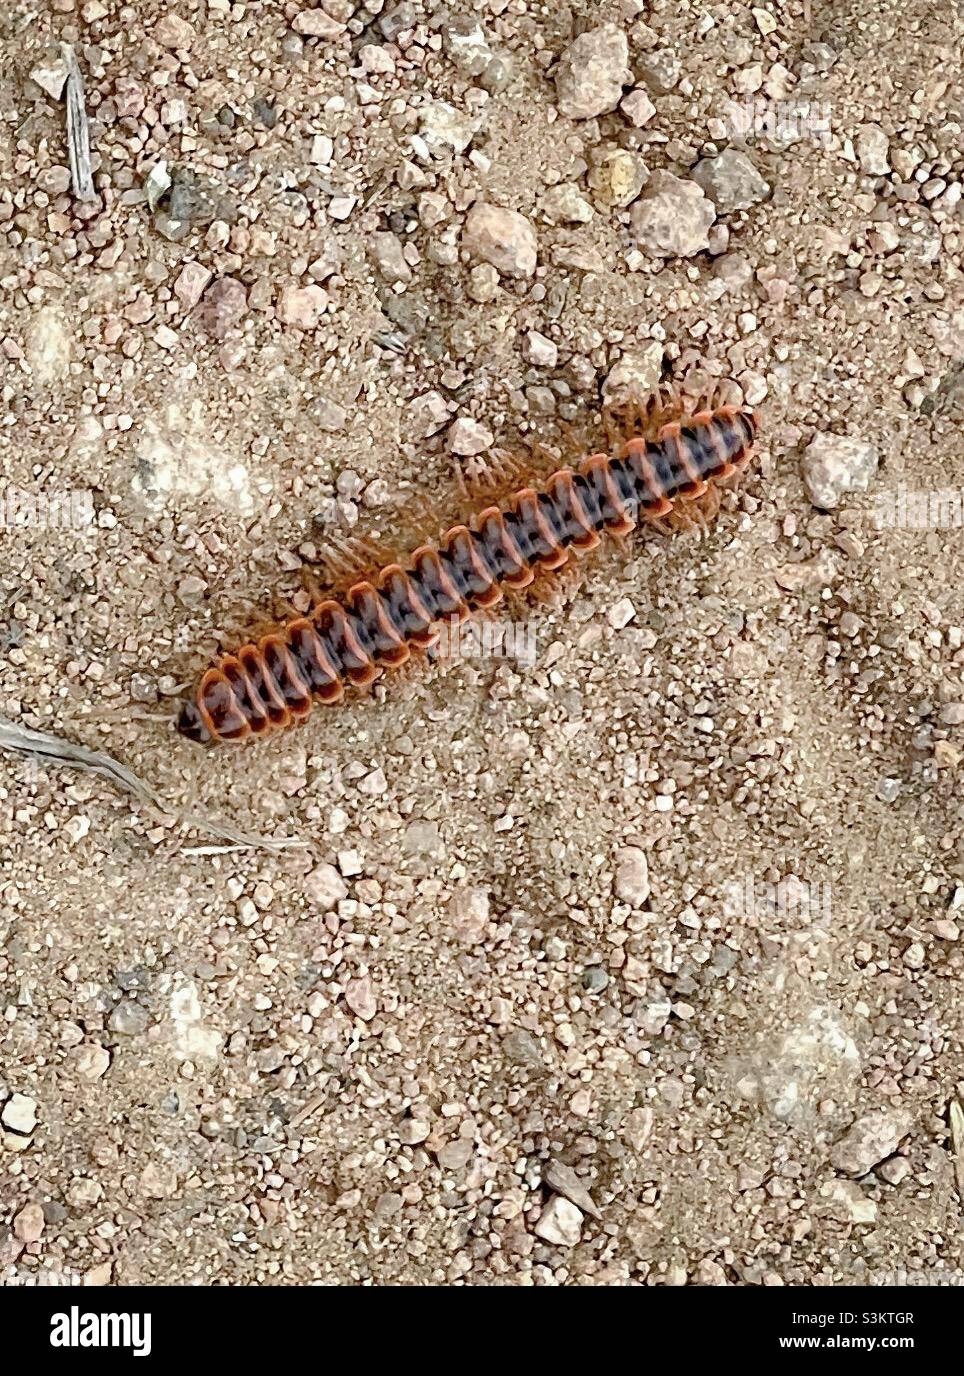 Flat back millipede crossing our hiking trail in the Wichita Mountains. Stock Photo